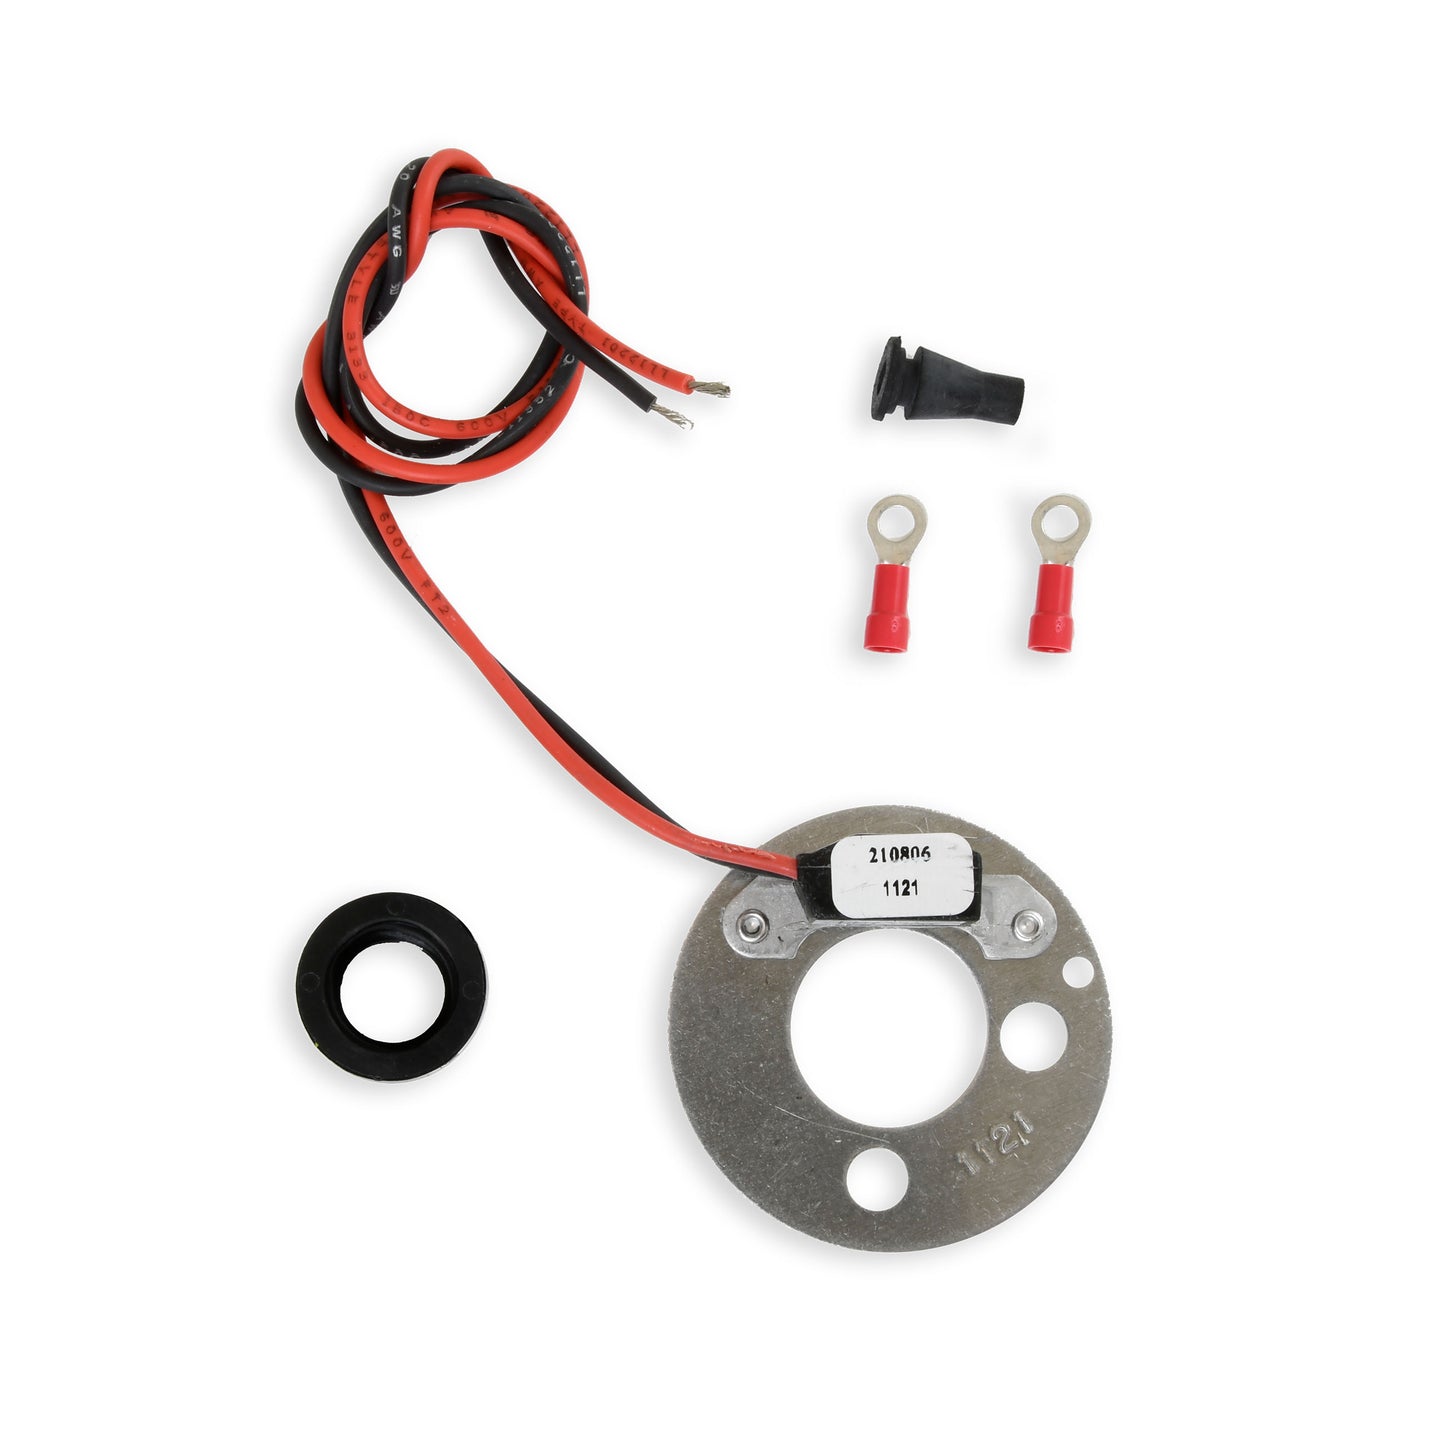 PerTronix Ignitor Electronic Ignition Conversion Kit for Delco Distributors-1121